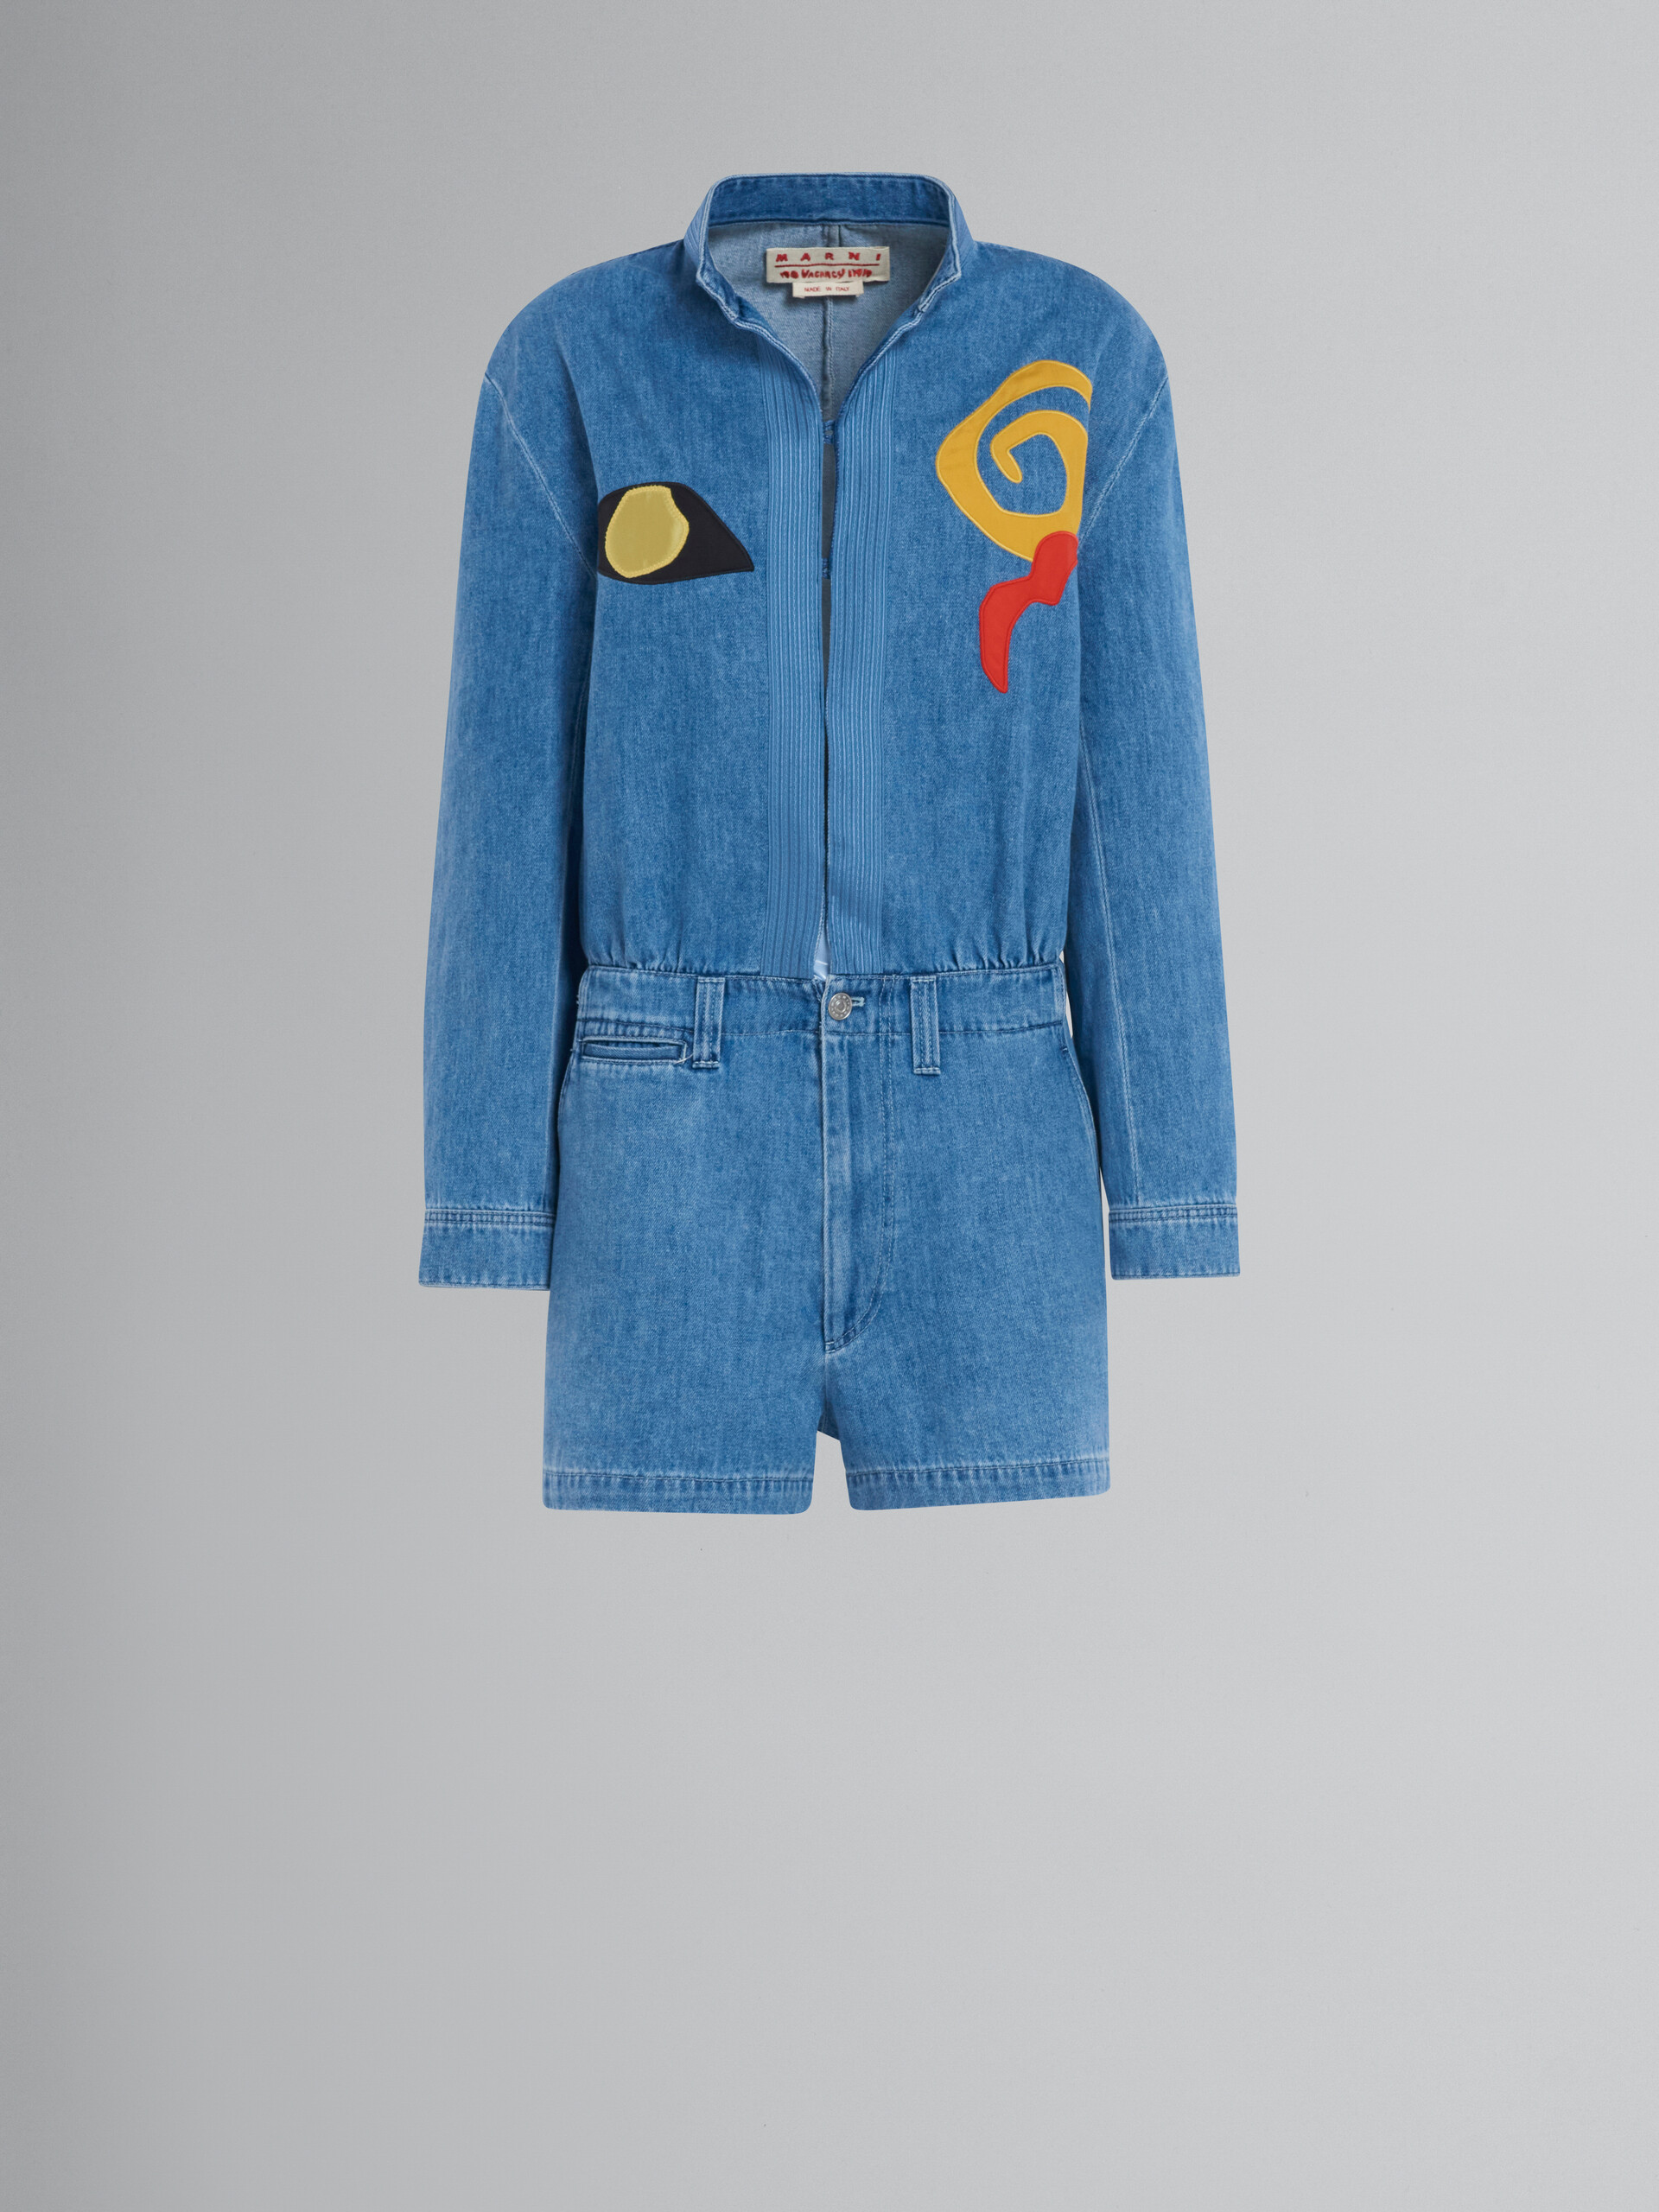 Marni x No Vacancy Inn - Blue chambray jumpsuit with embroidery - Overalls - Image 1